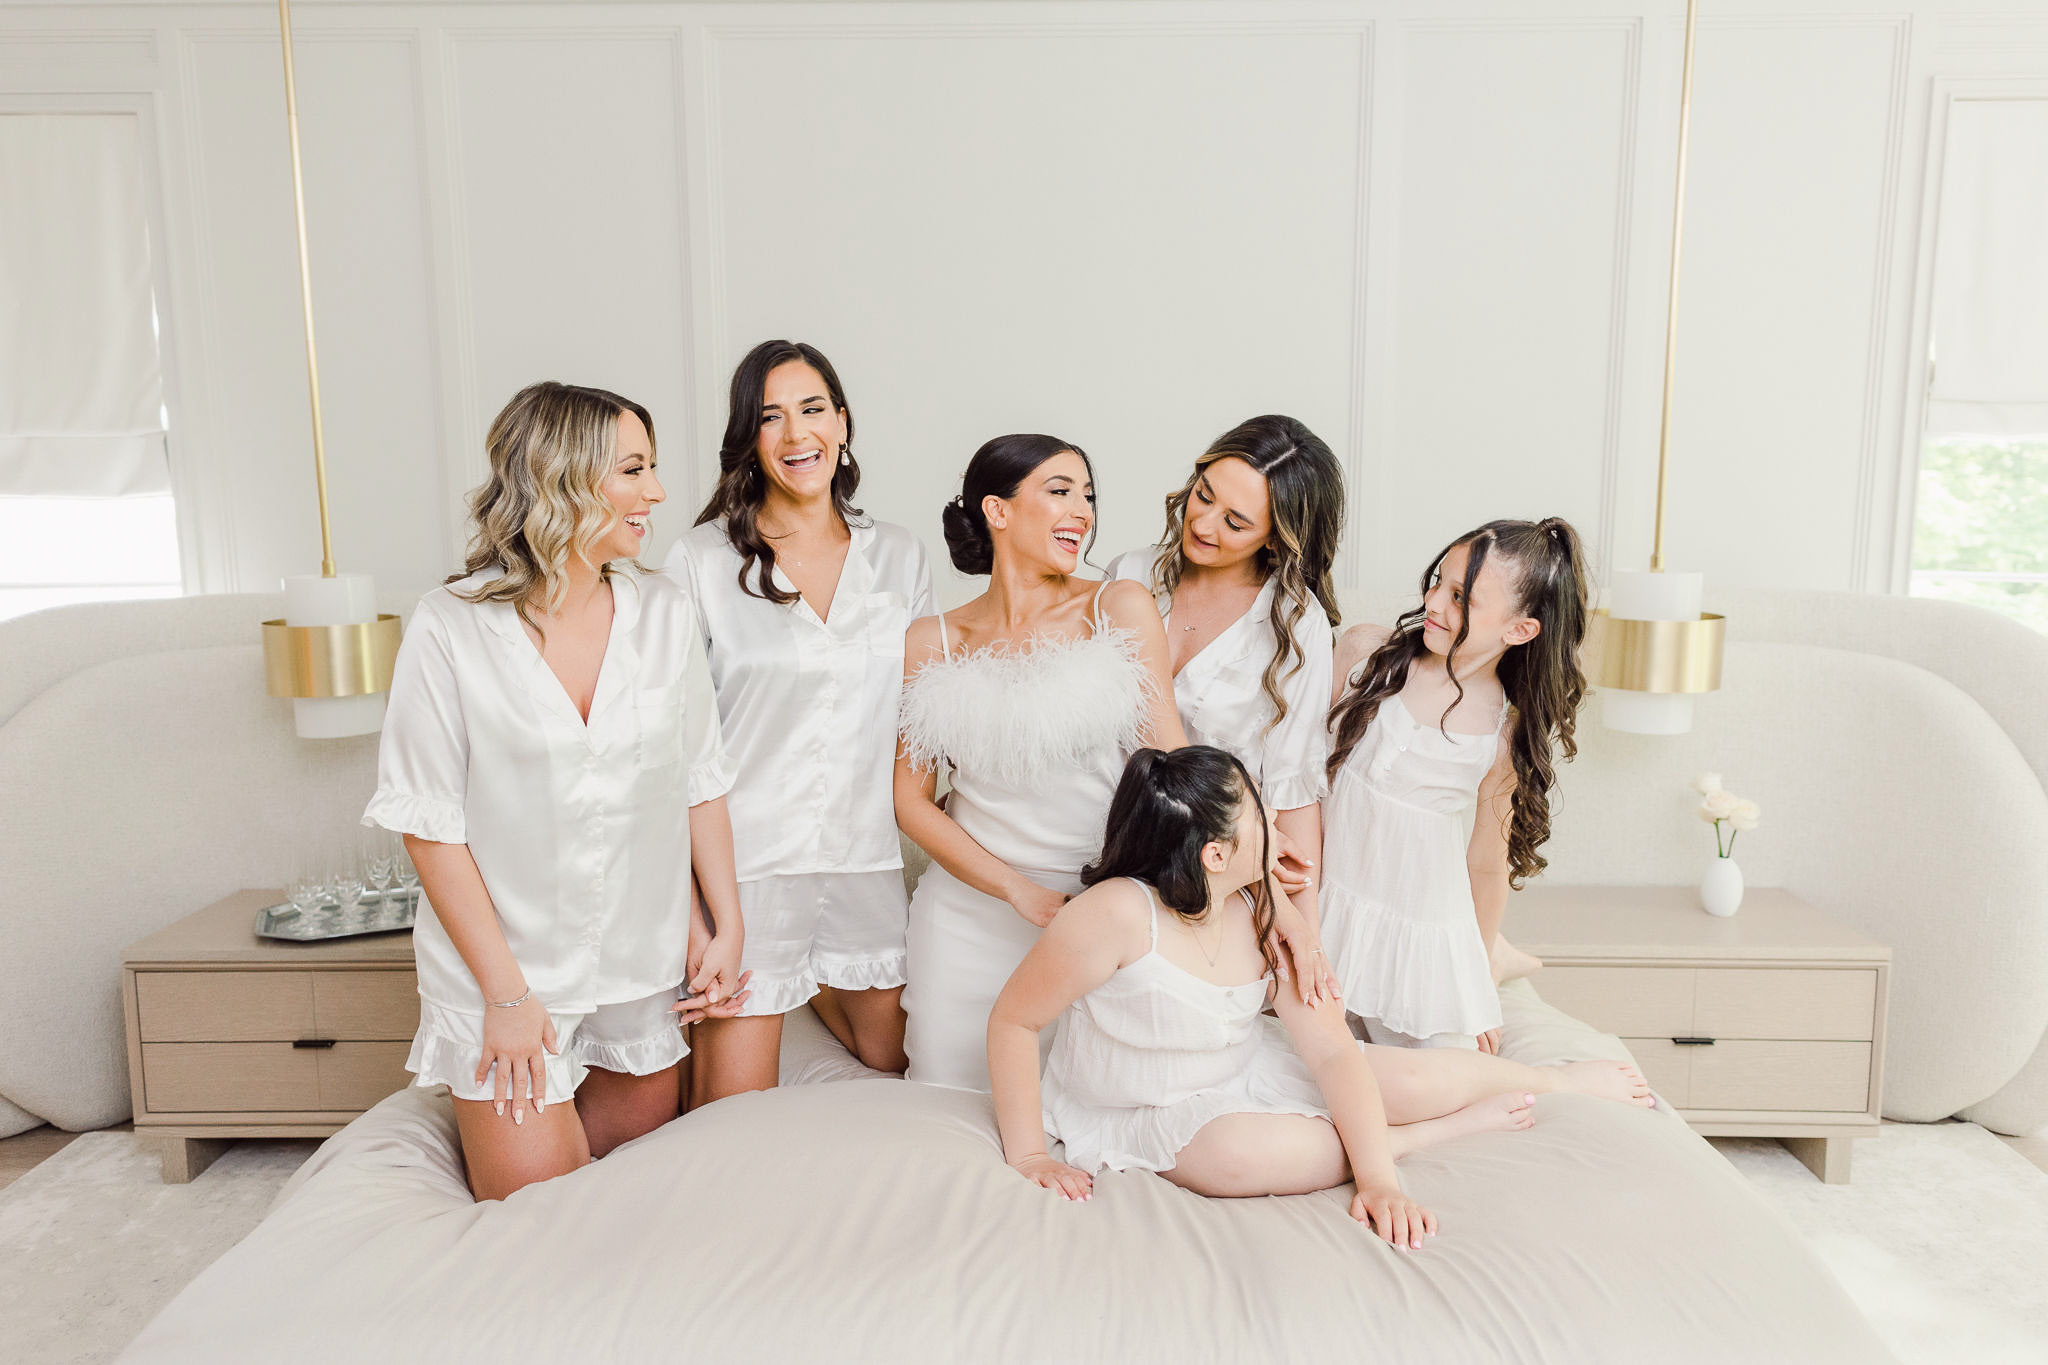 Bridesmaids posing for a photo on a bed.